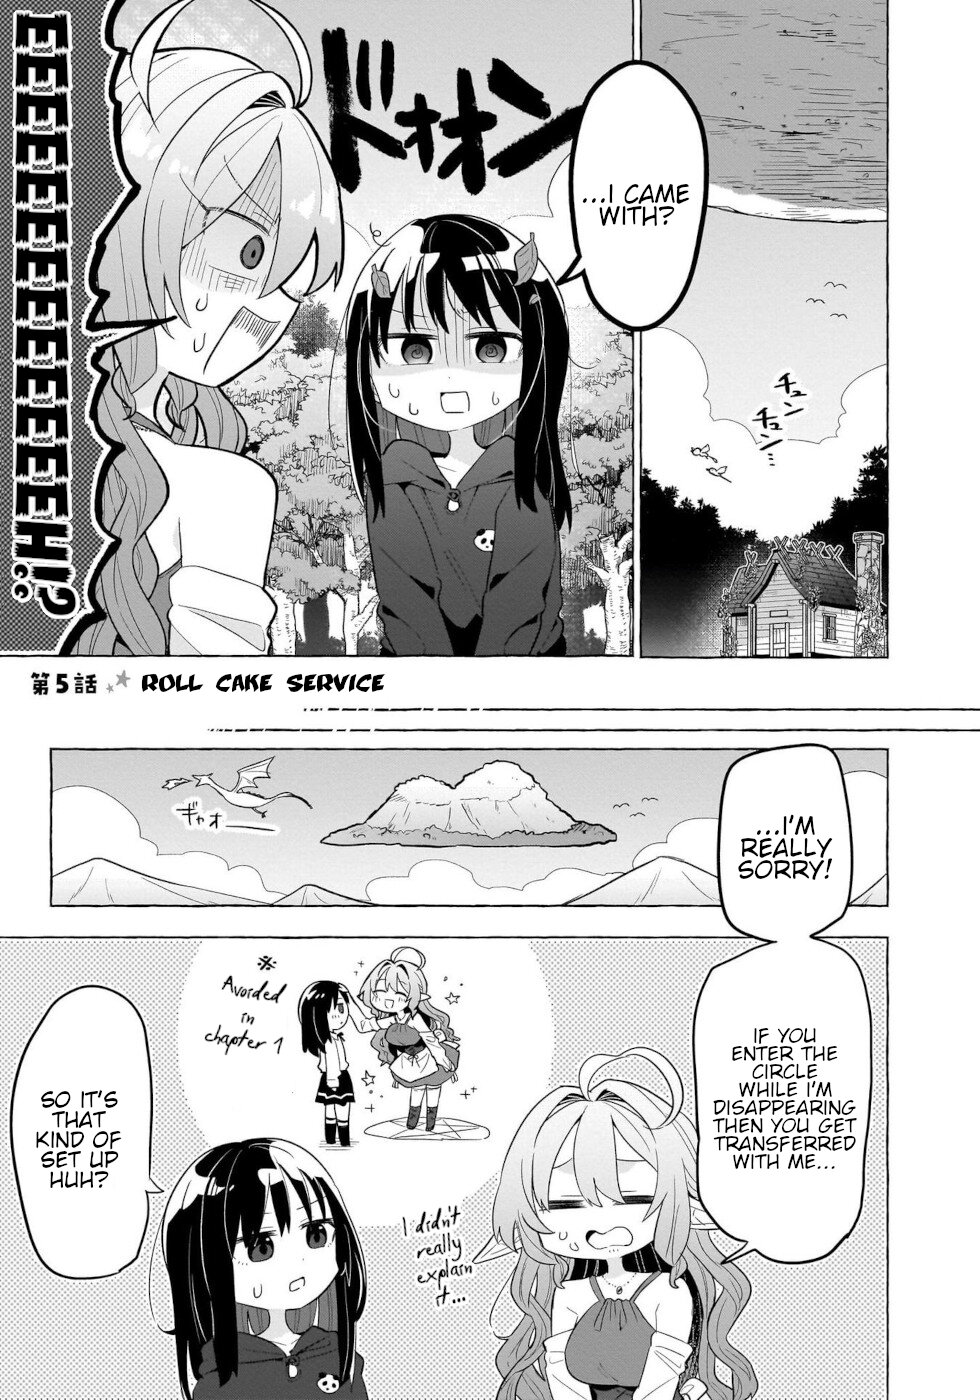 Sweets, Elf, And A High School Girl Vol.1 Chapter 5